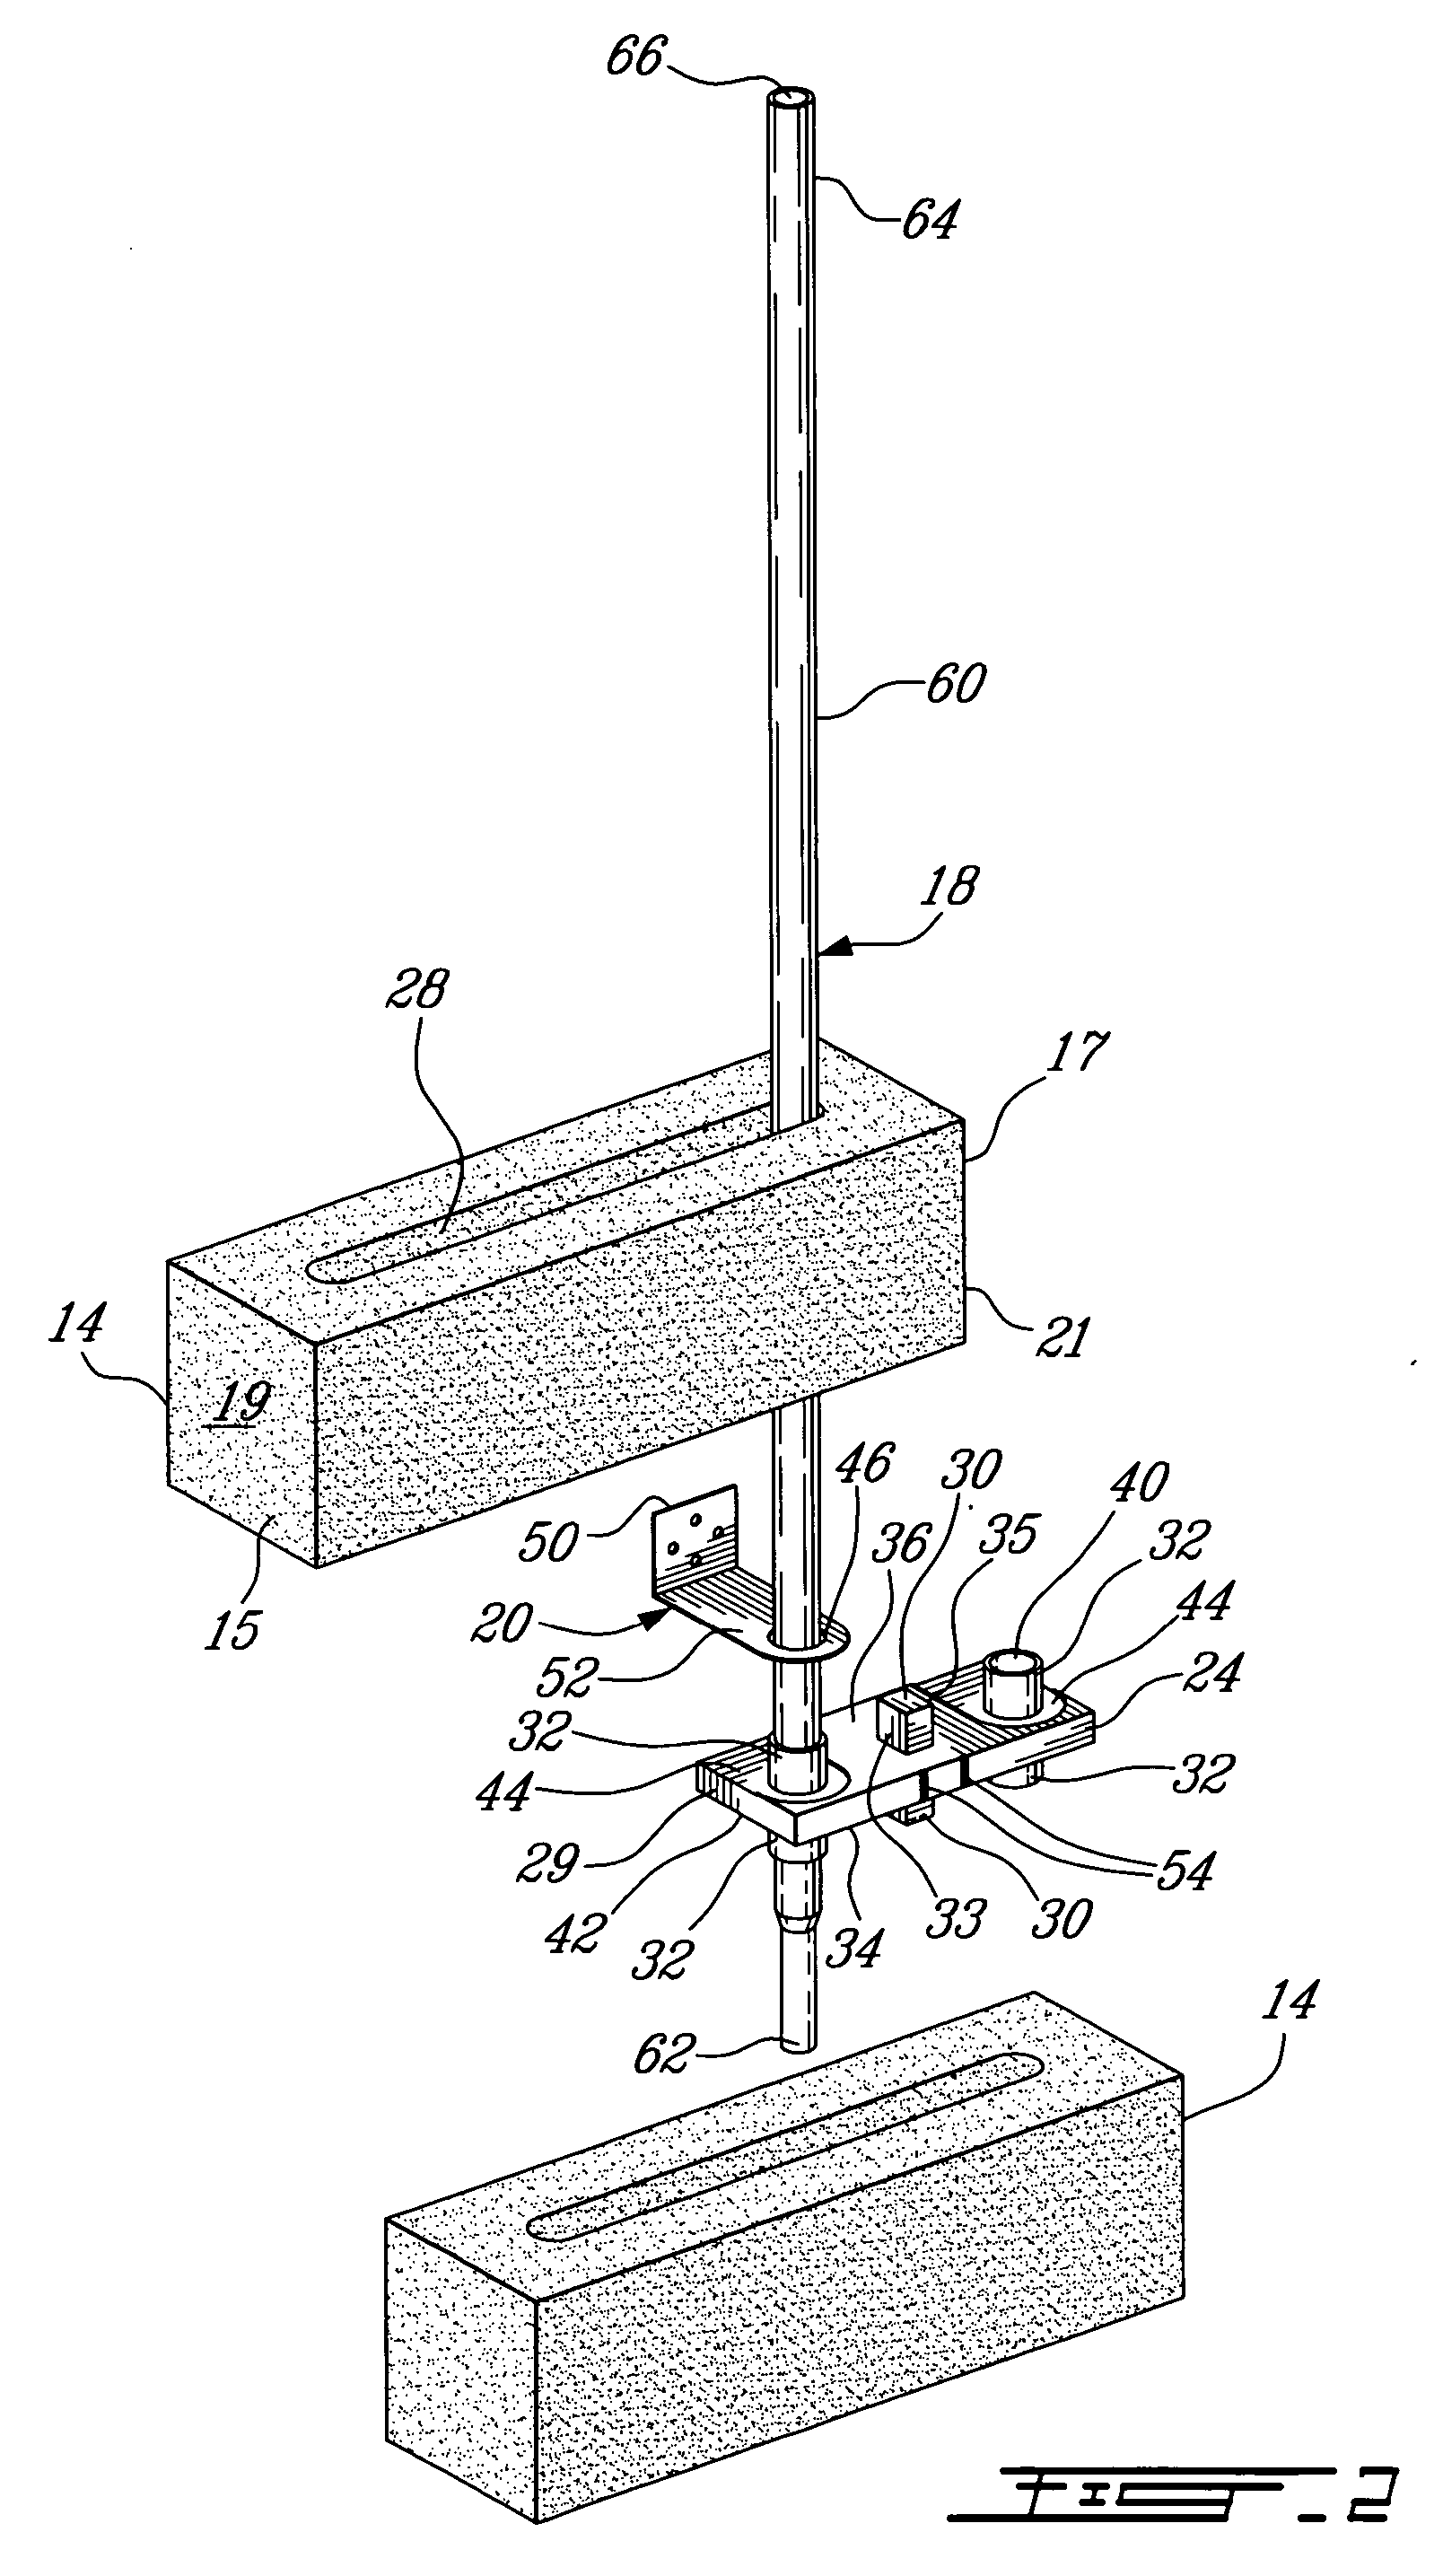 Method and implements for erecting walls including a plurality of wall components